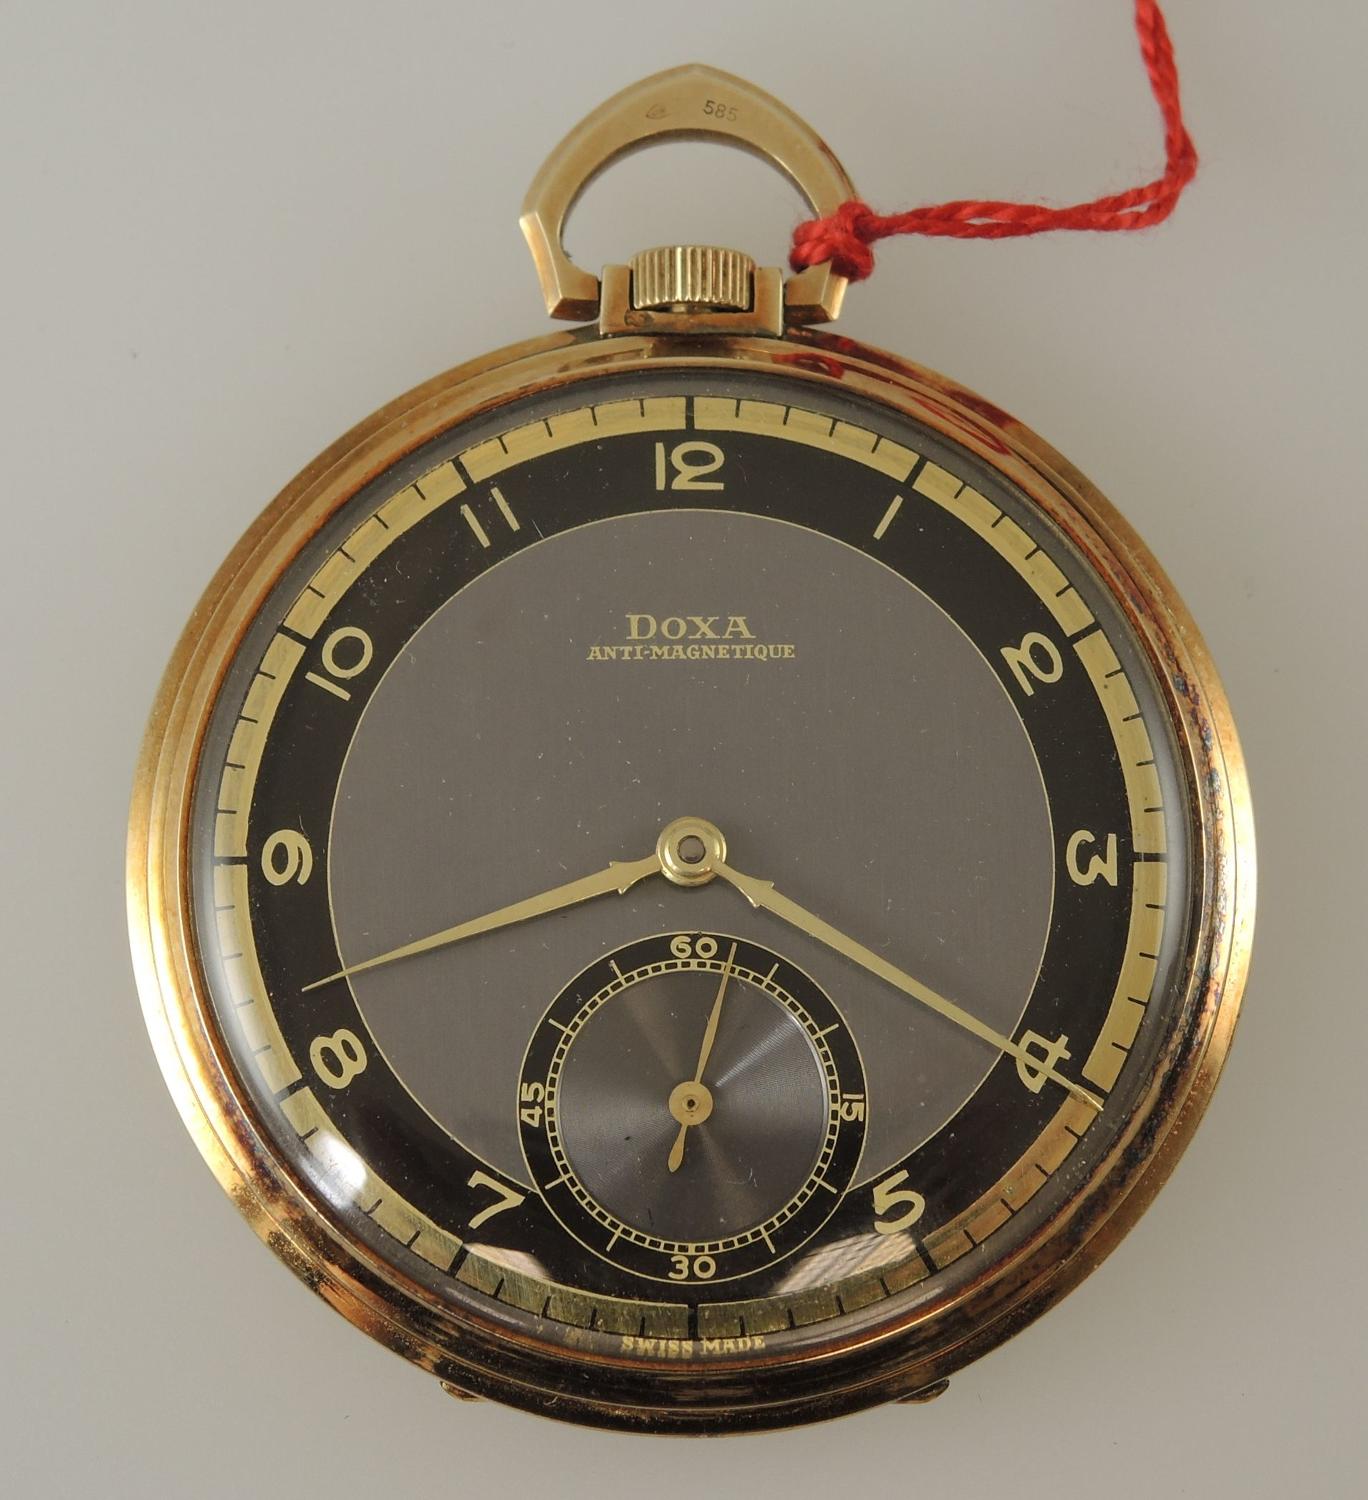 Solid 14K DOXA pocket watch with Box and Tag c1925